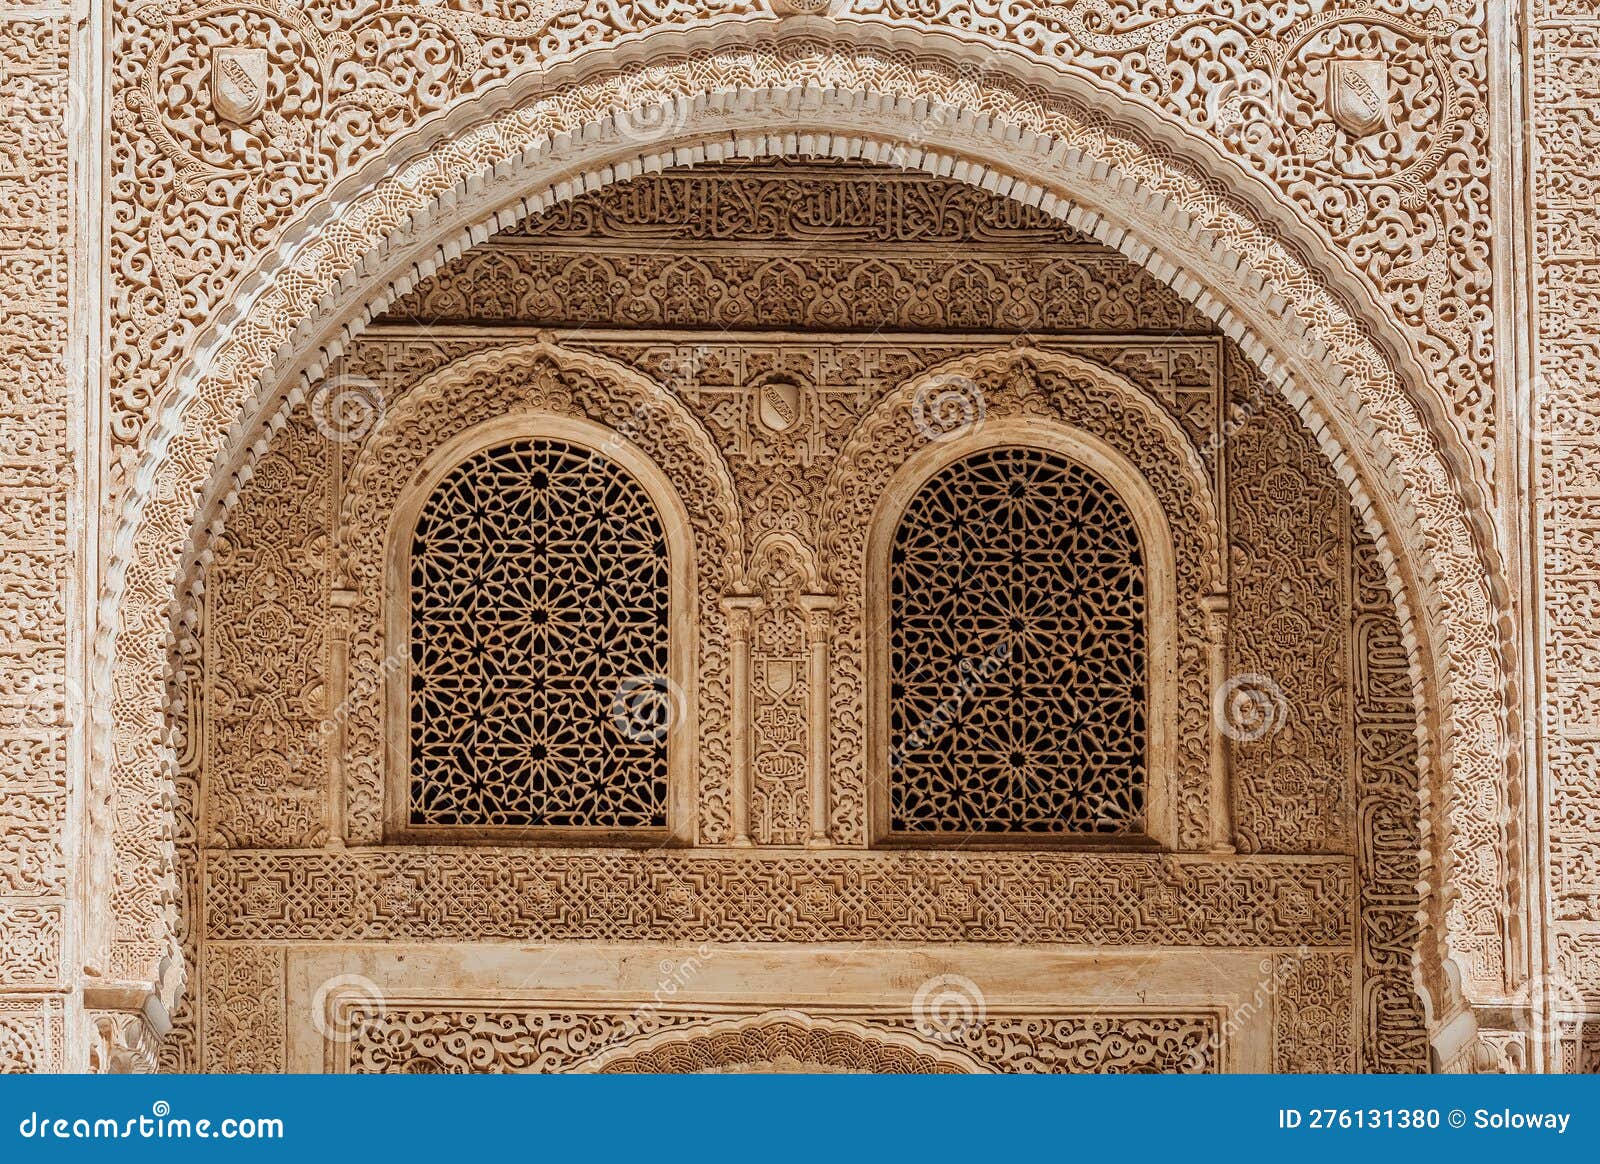 marble capitals and stucco decoration of the portico in patio del cuarto dorado in mexuar in comares palace alhambra, andalusia,